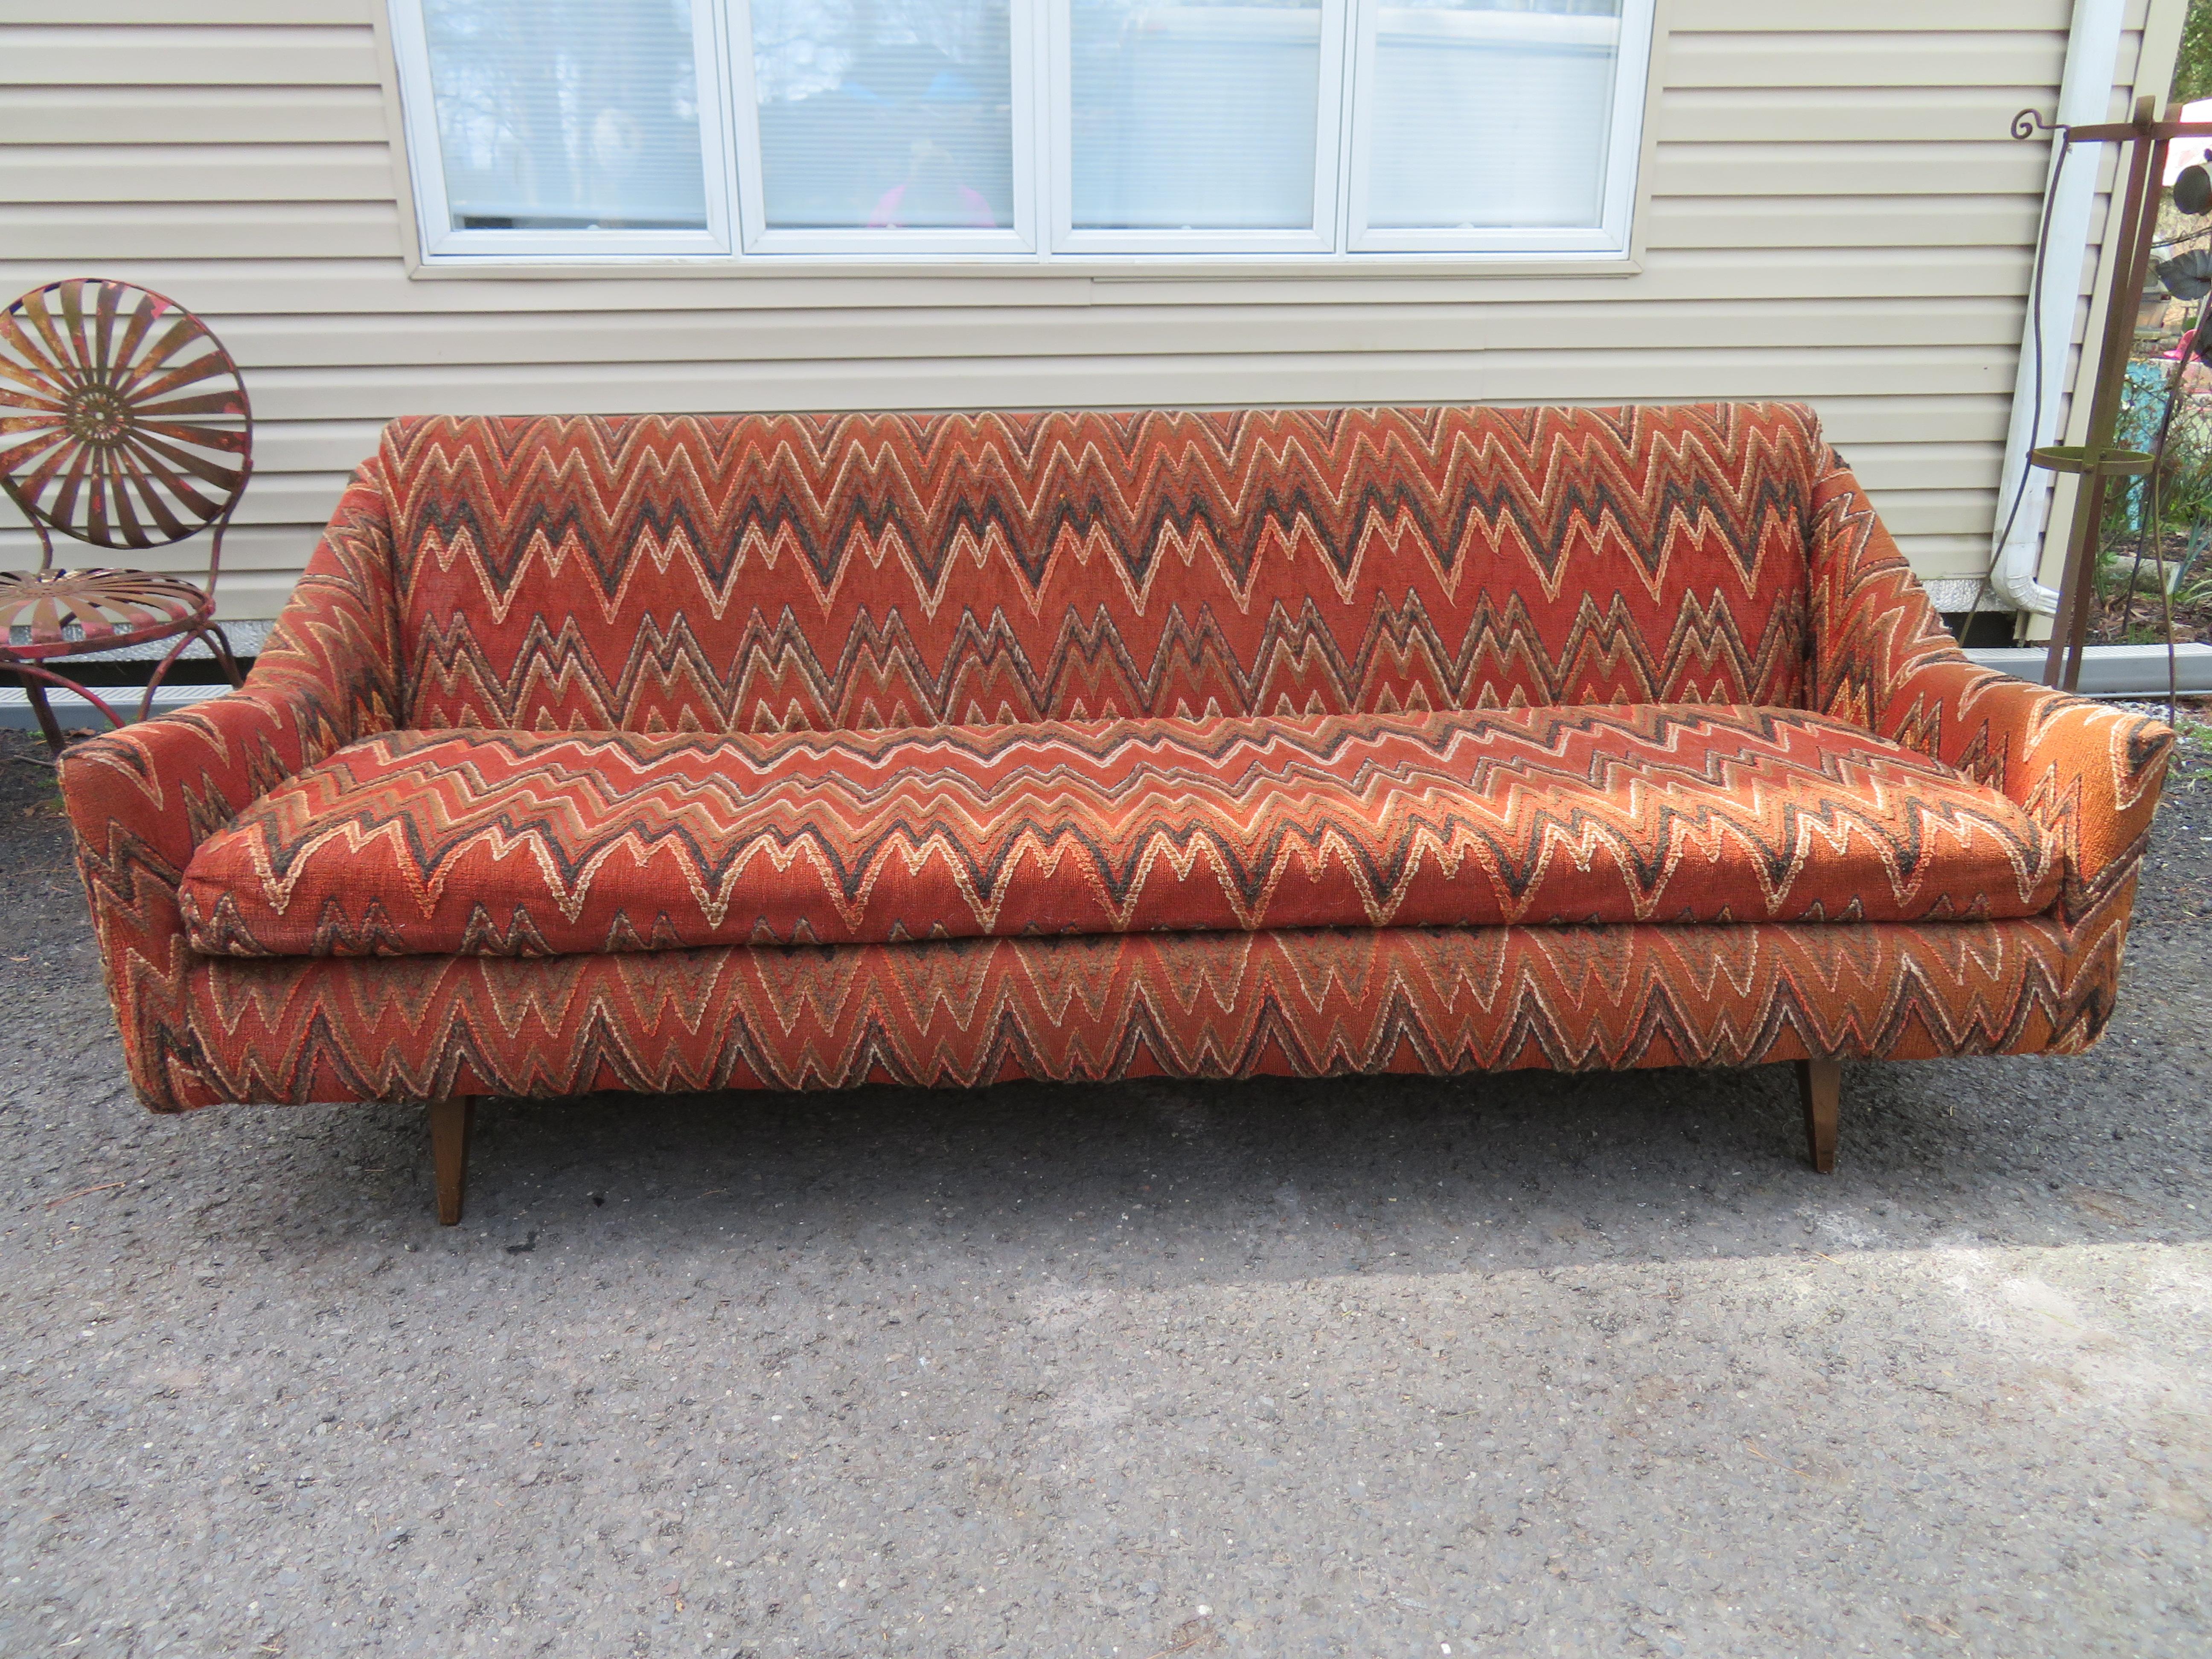 Wonderful Swedish modern Folke Ohlsson Dux style sofa. This sofa retains its original heavy-weight textured zig-zag fabric in presentable condition-cleaning is recommended. The fabric is almost like a tapestry, giving off a super vintage vibe! This